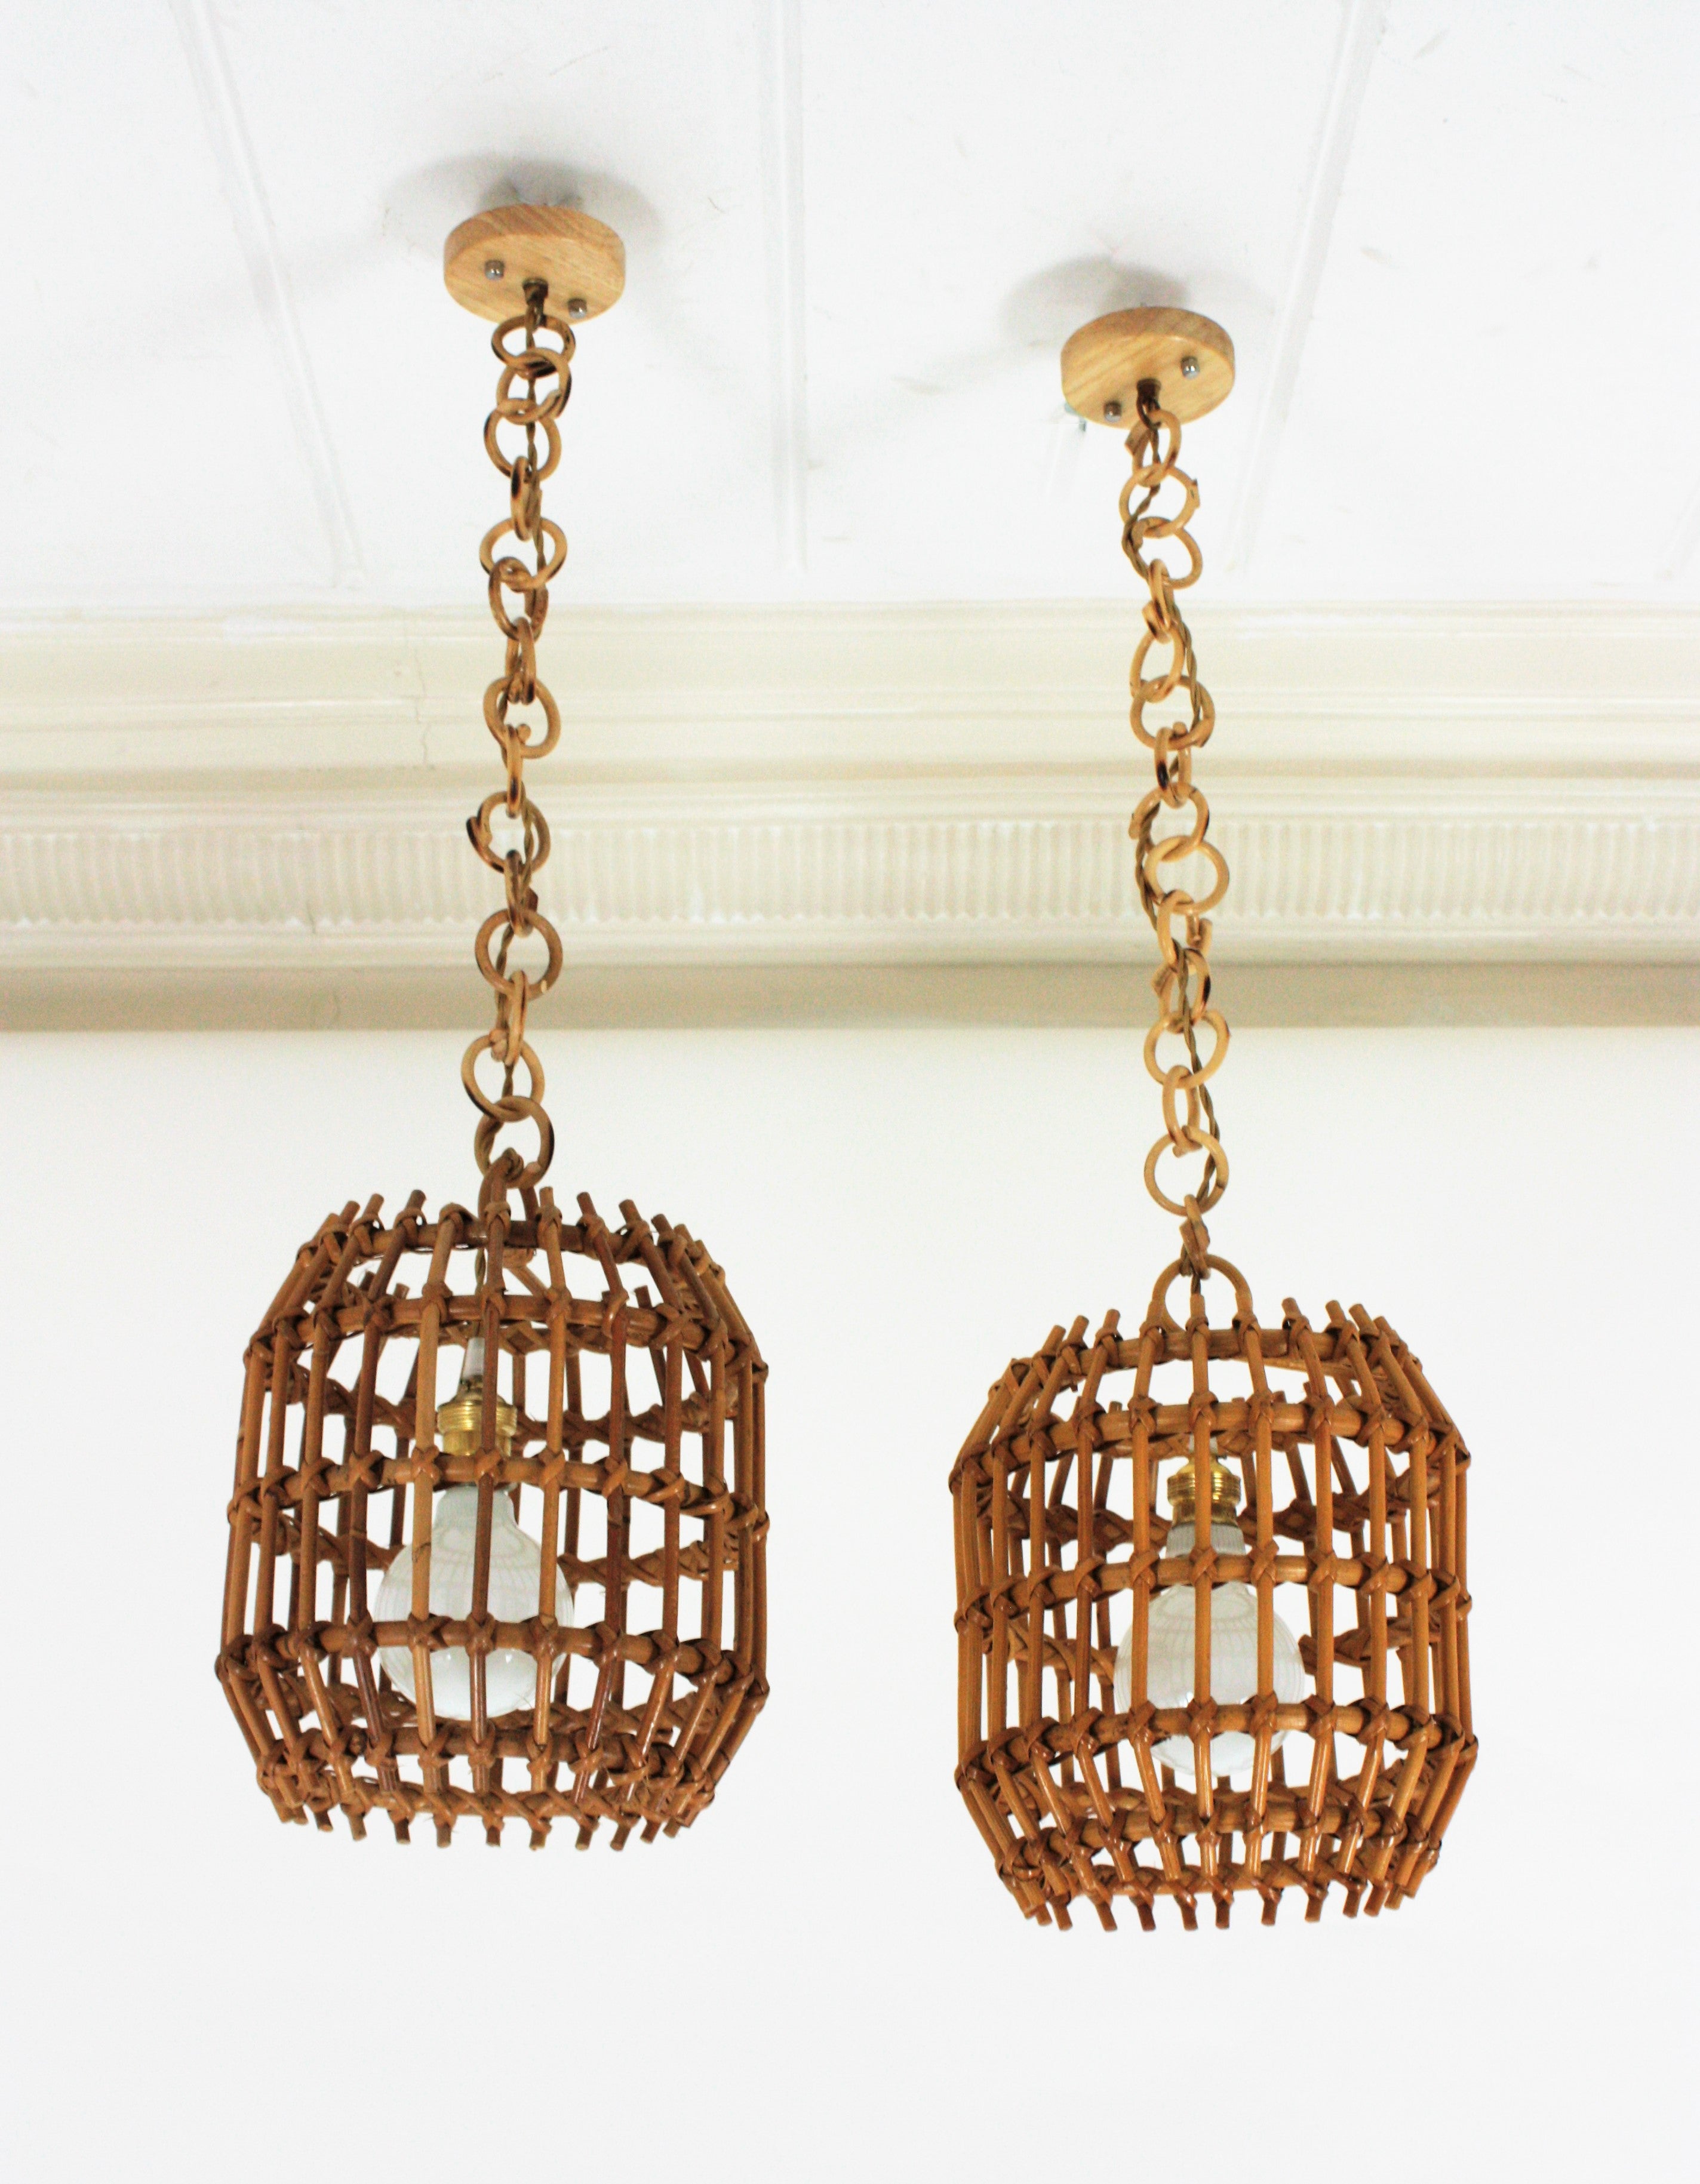 Pair of rattan suspension lamps / lanterns with cylinder grid design. French, 1960s
Eye-catching pair of rattan cylinder shaped pendant lights. Entirely made by hand in rattan with grid design. Beautifully designed combining chinoiserie and